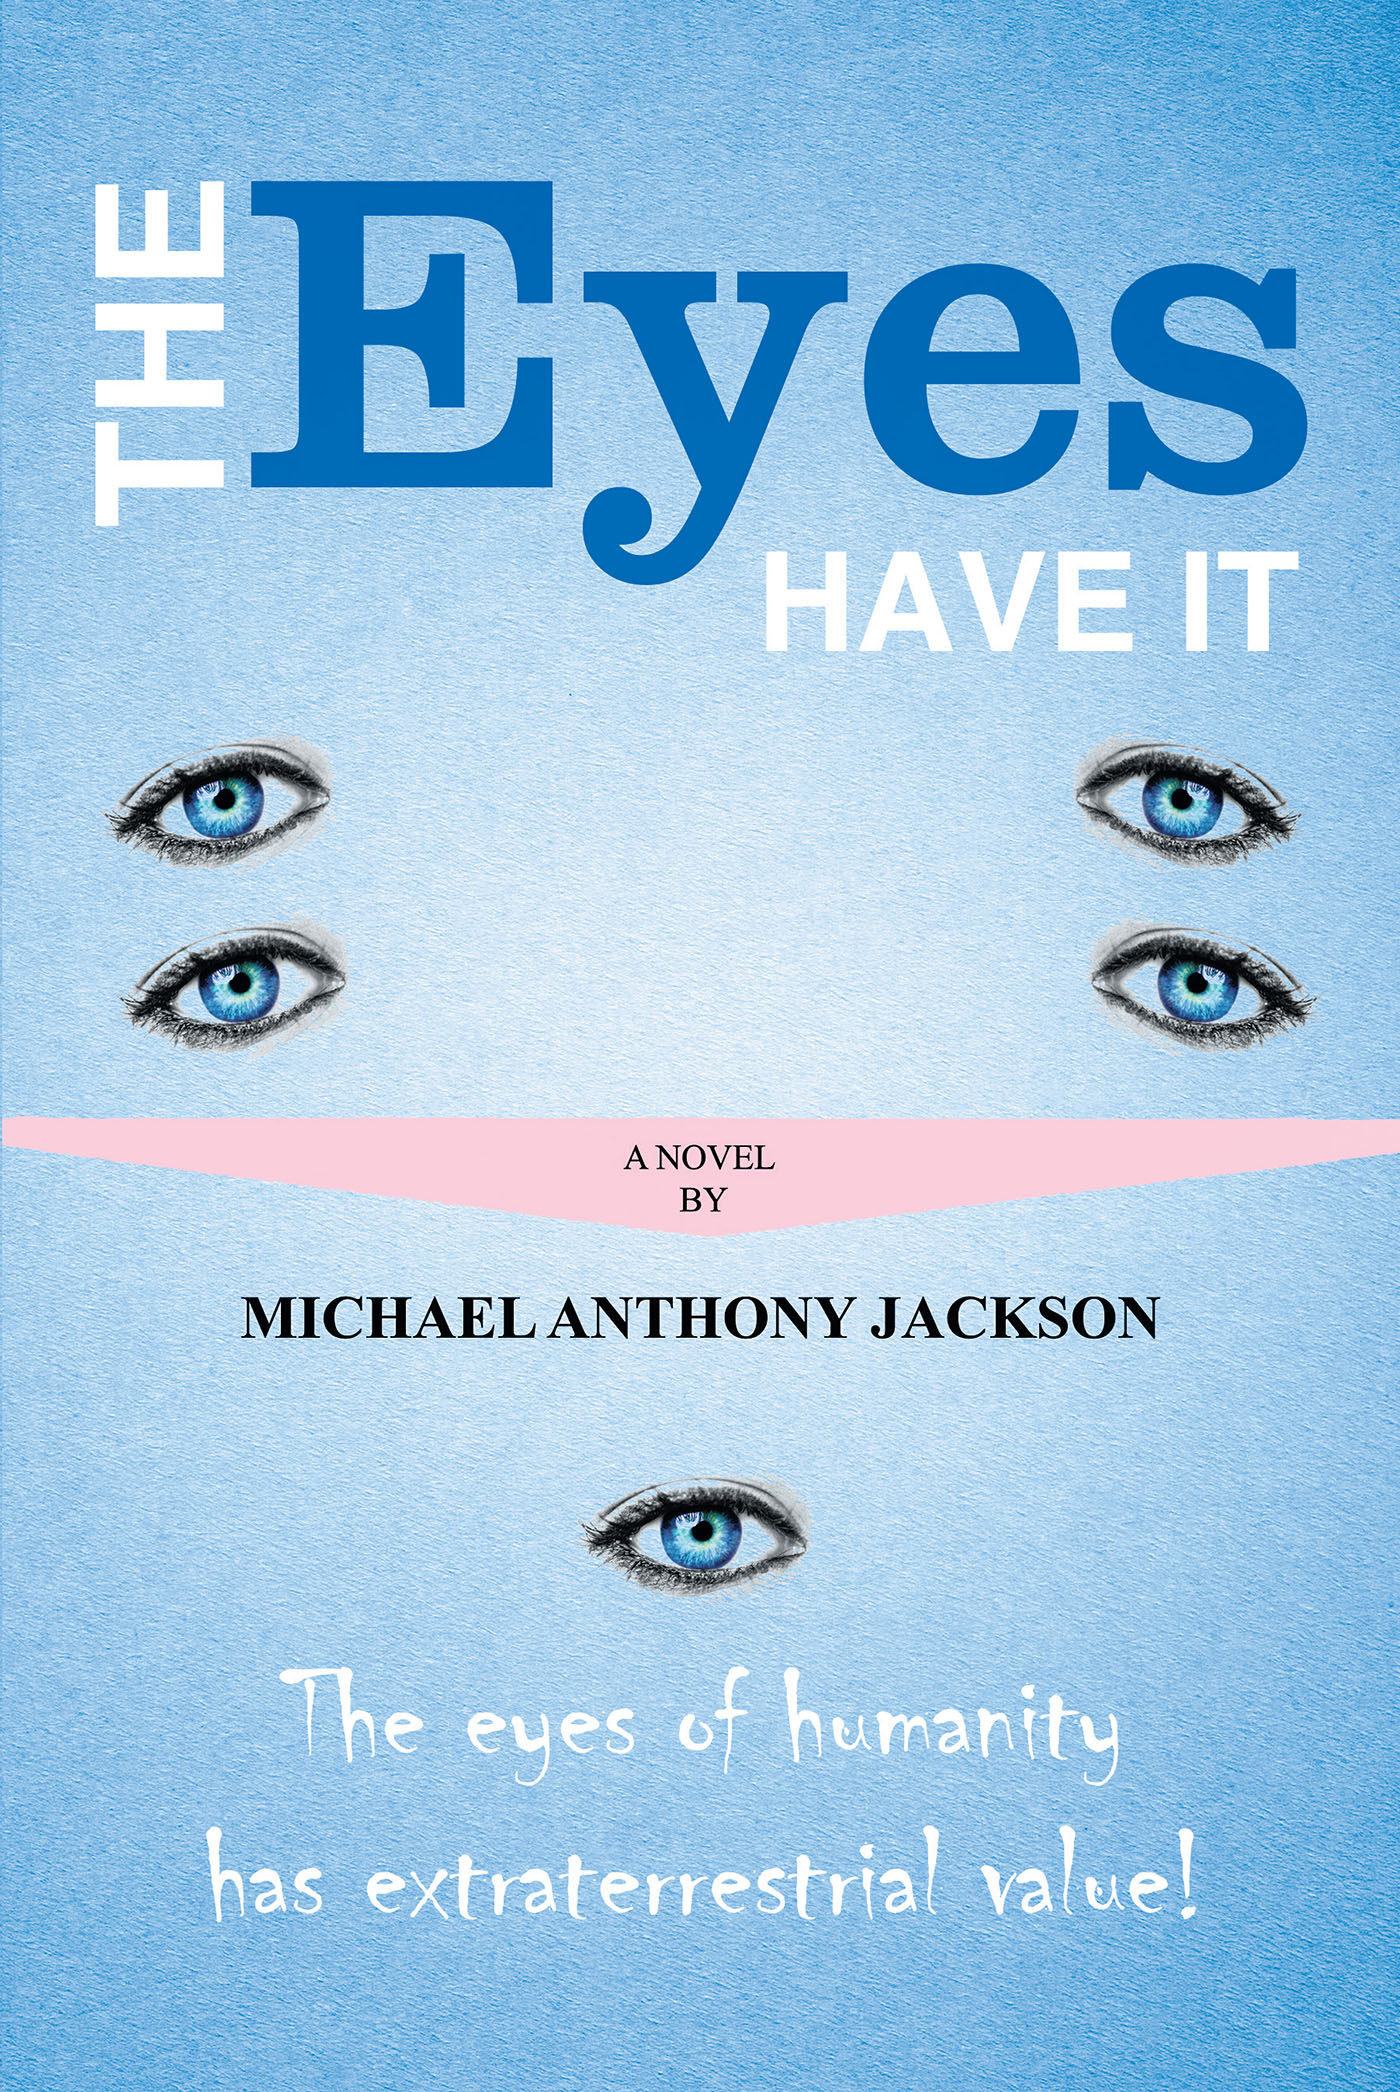 "The Eyes Have It," from Michael Anthony Jackson, Follows One Small Town and 200 Alien Invaders Looking to Assimilate with the Earth